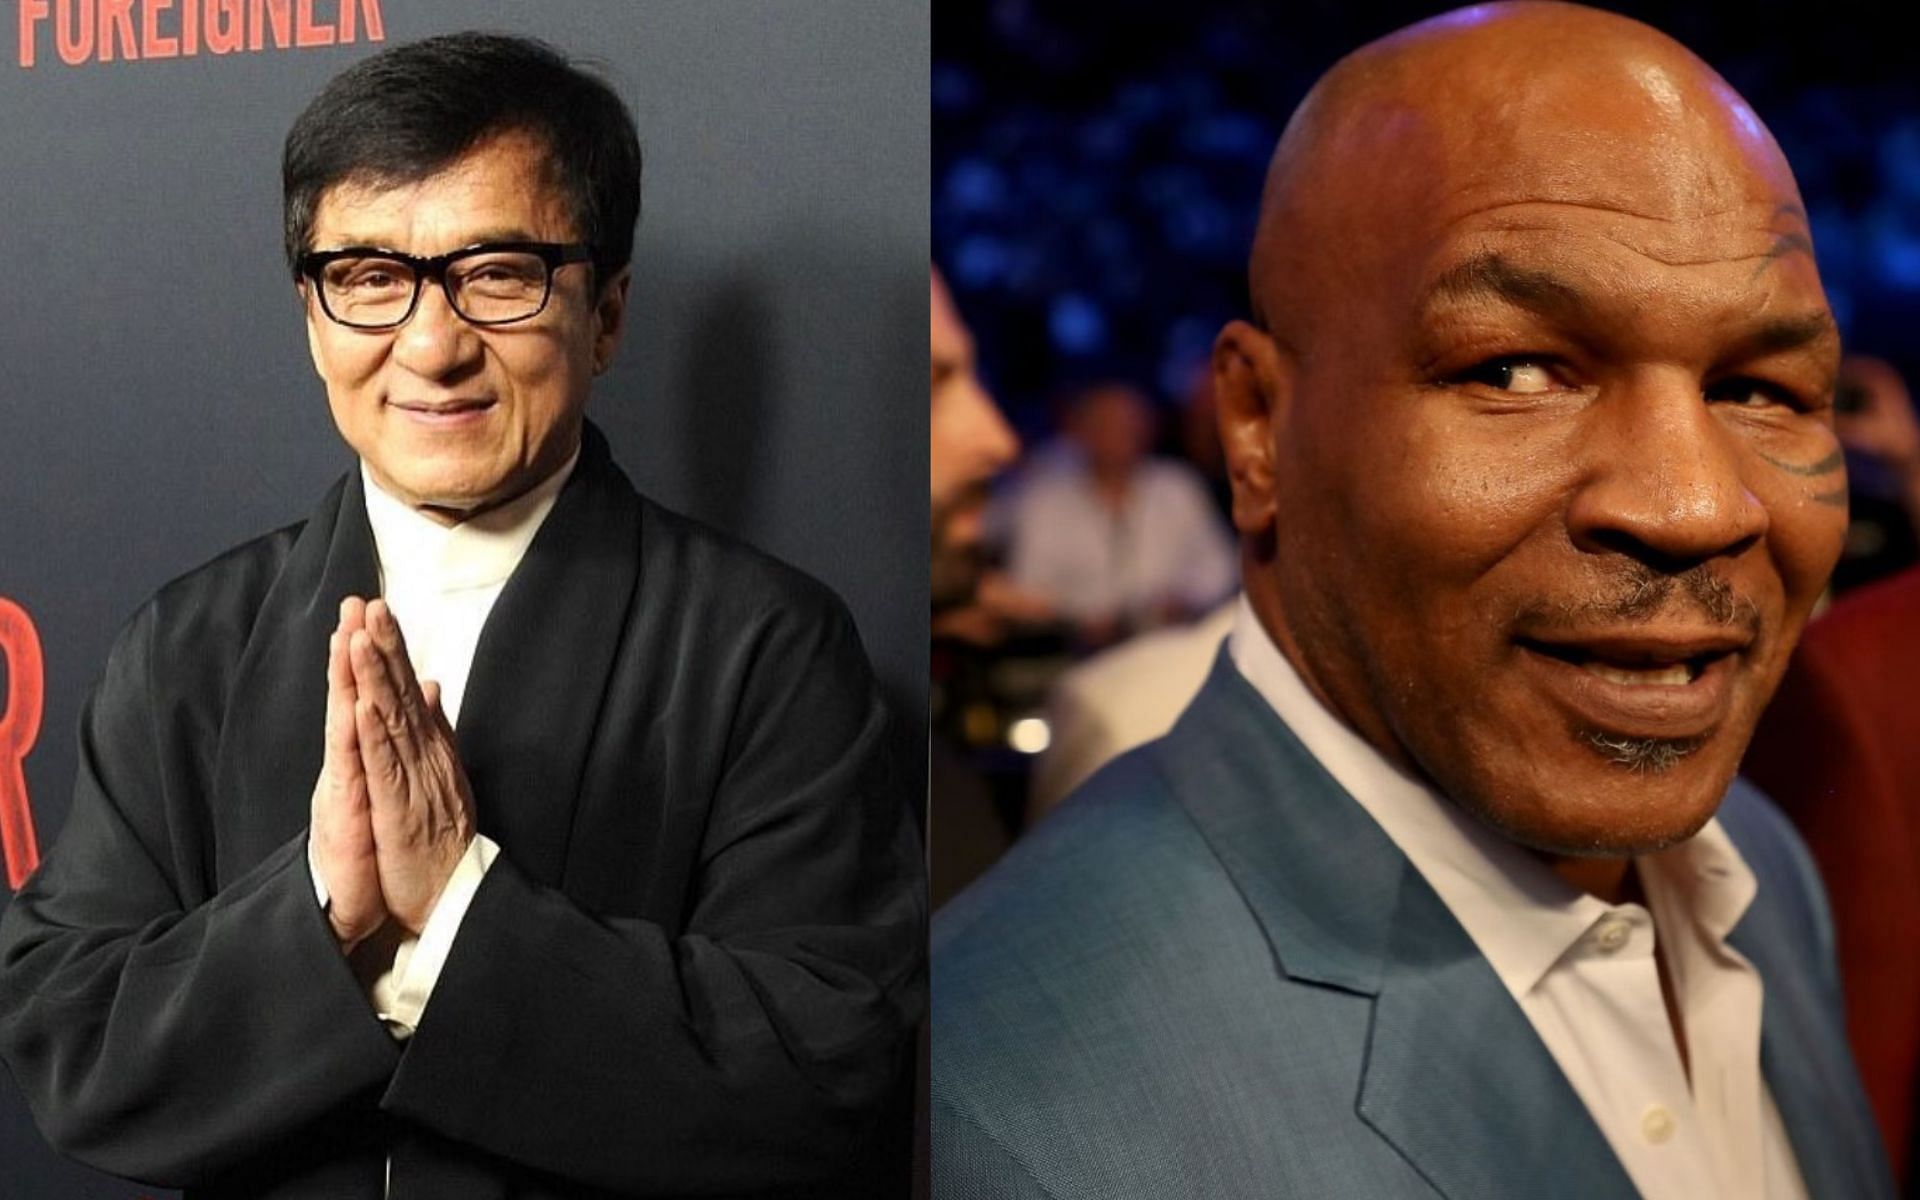 Jackie Chan (Left) and Mike Tyson (Right) (Image Credits: @jackiechan Instagram and Getty Images)